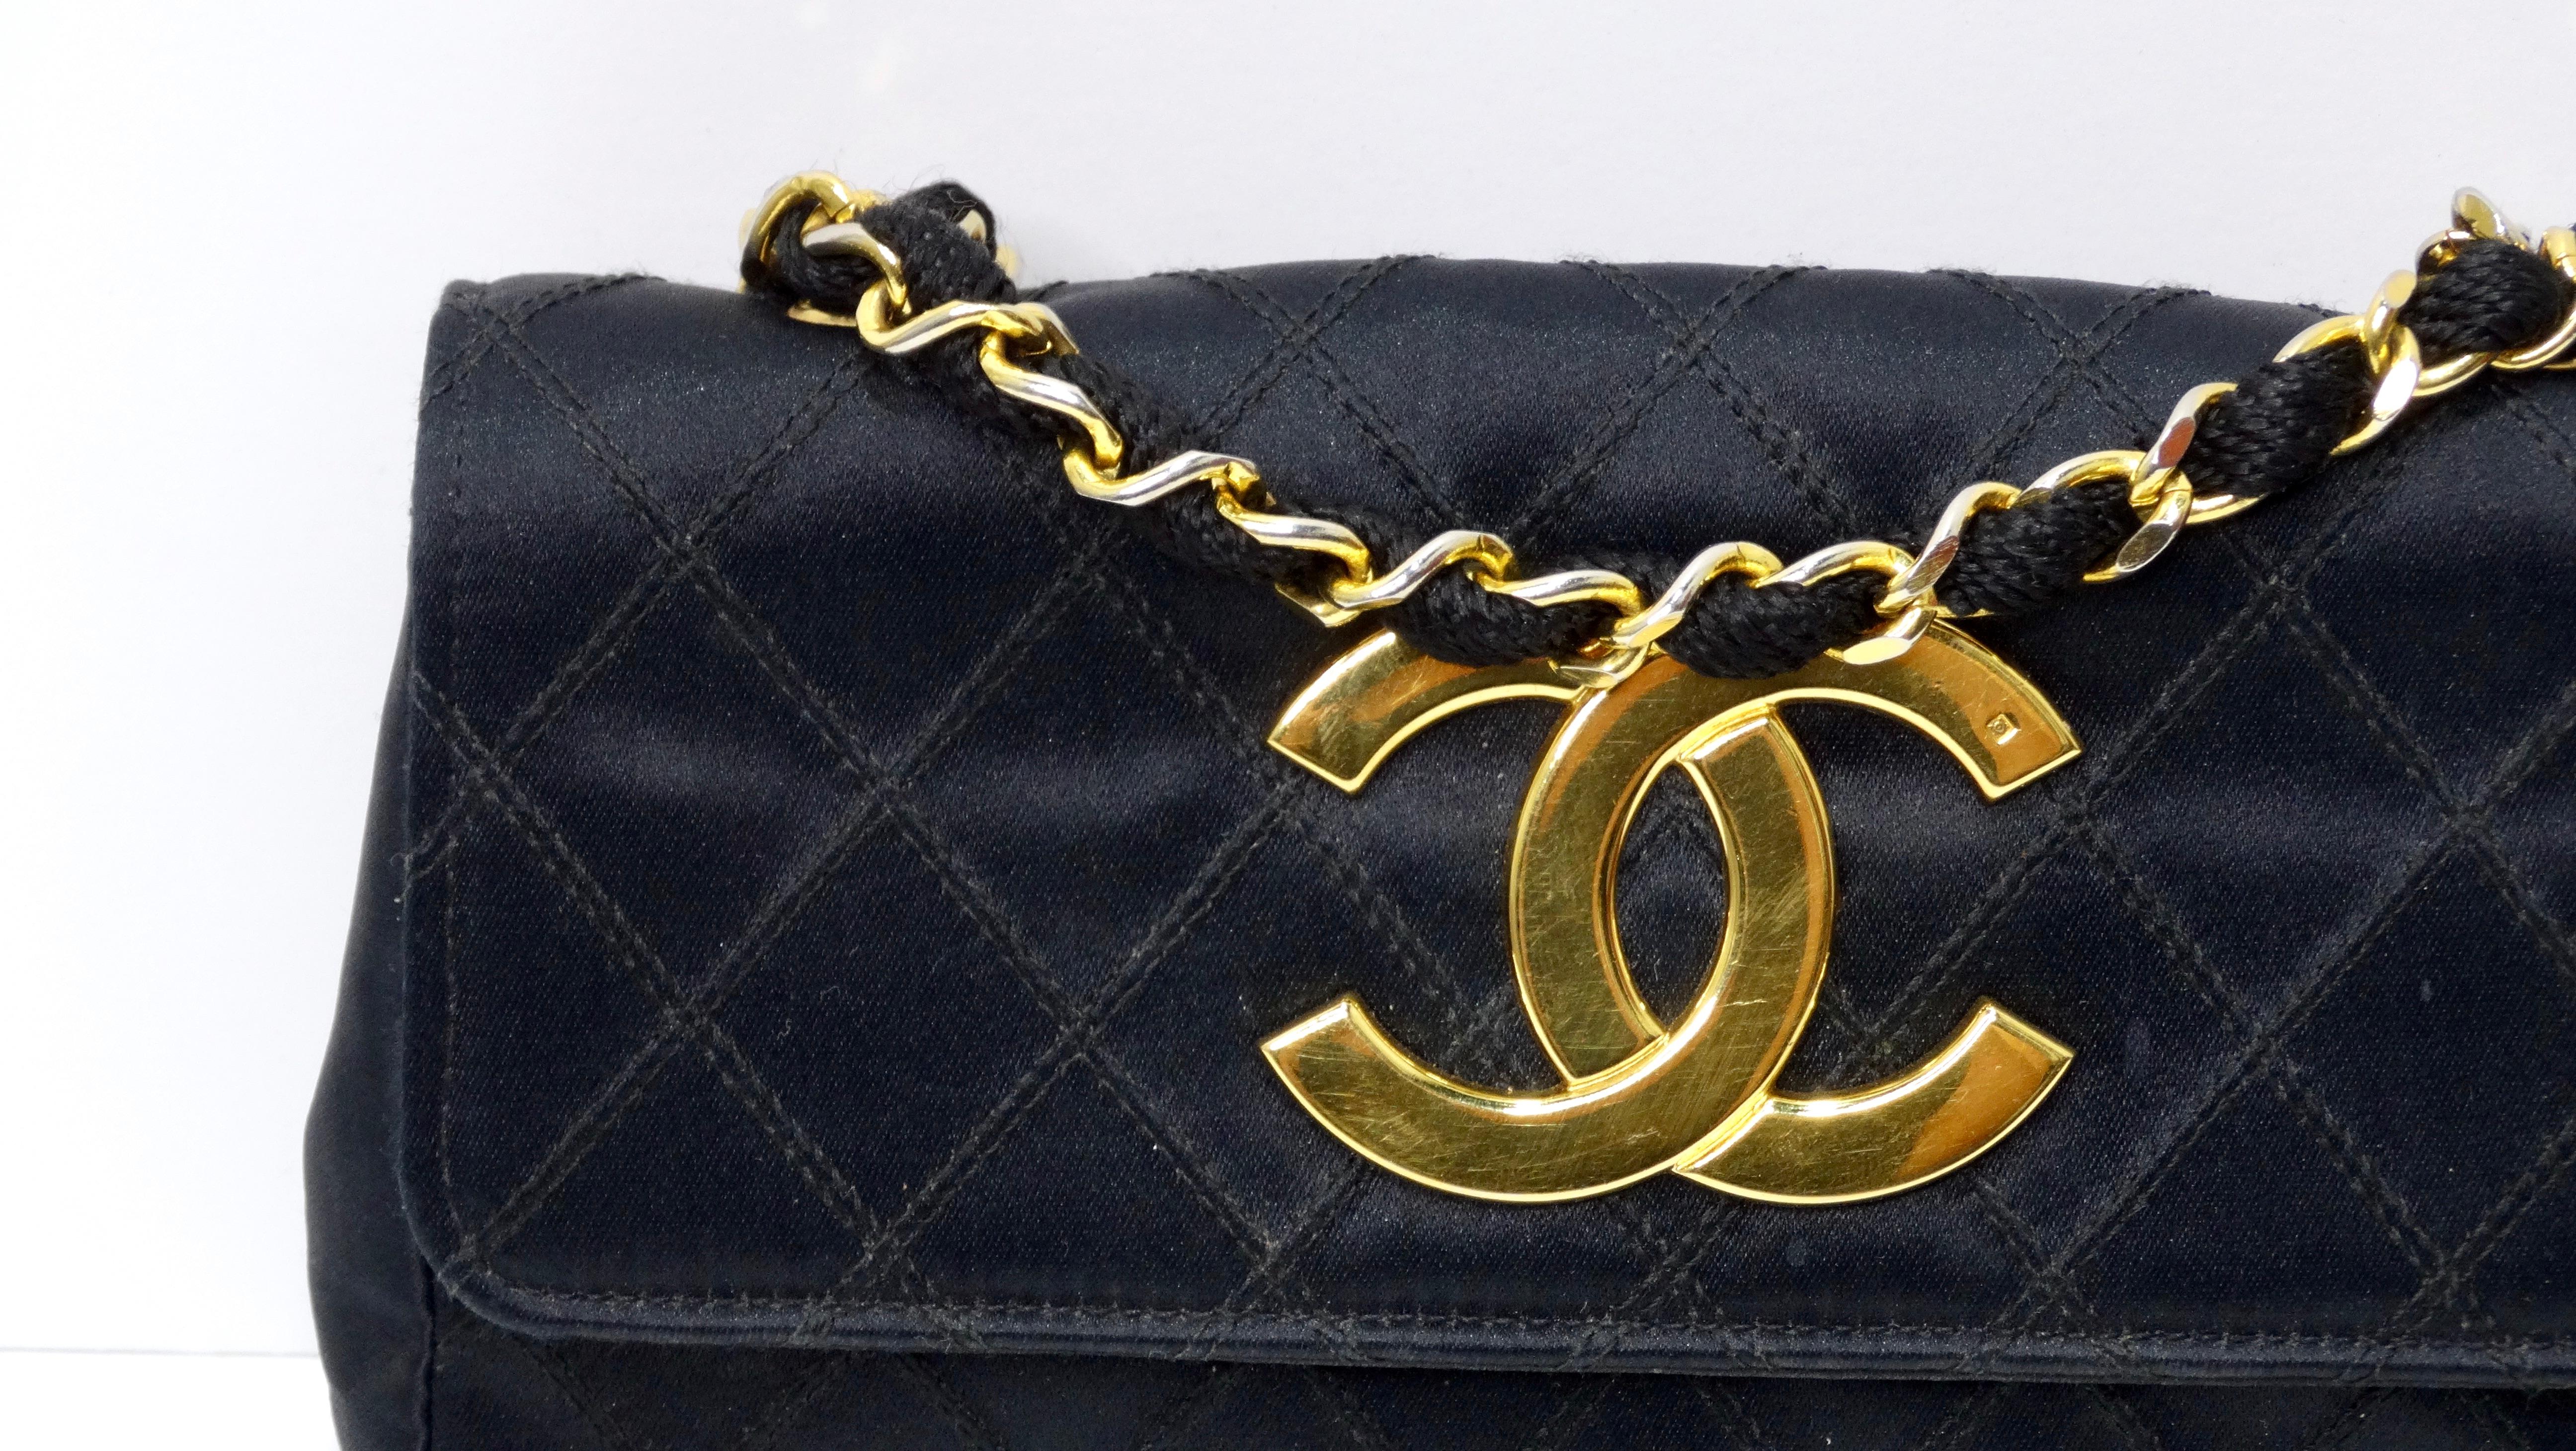 This is the most amazing and luxurious handbag from the House of Chanel! Don't miss out on the chance to have e a piece of Chanel history with this gem from the 1980's. Everything is better vintage! The condition of this bag proves this. This is in